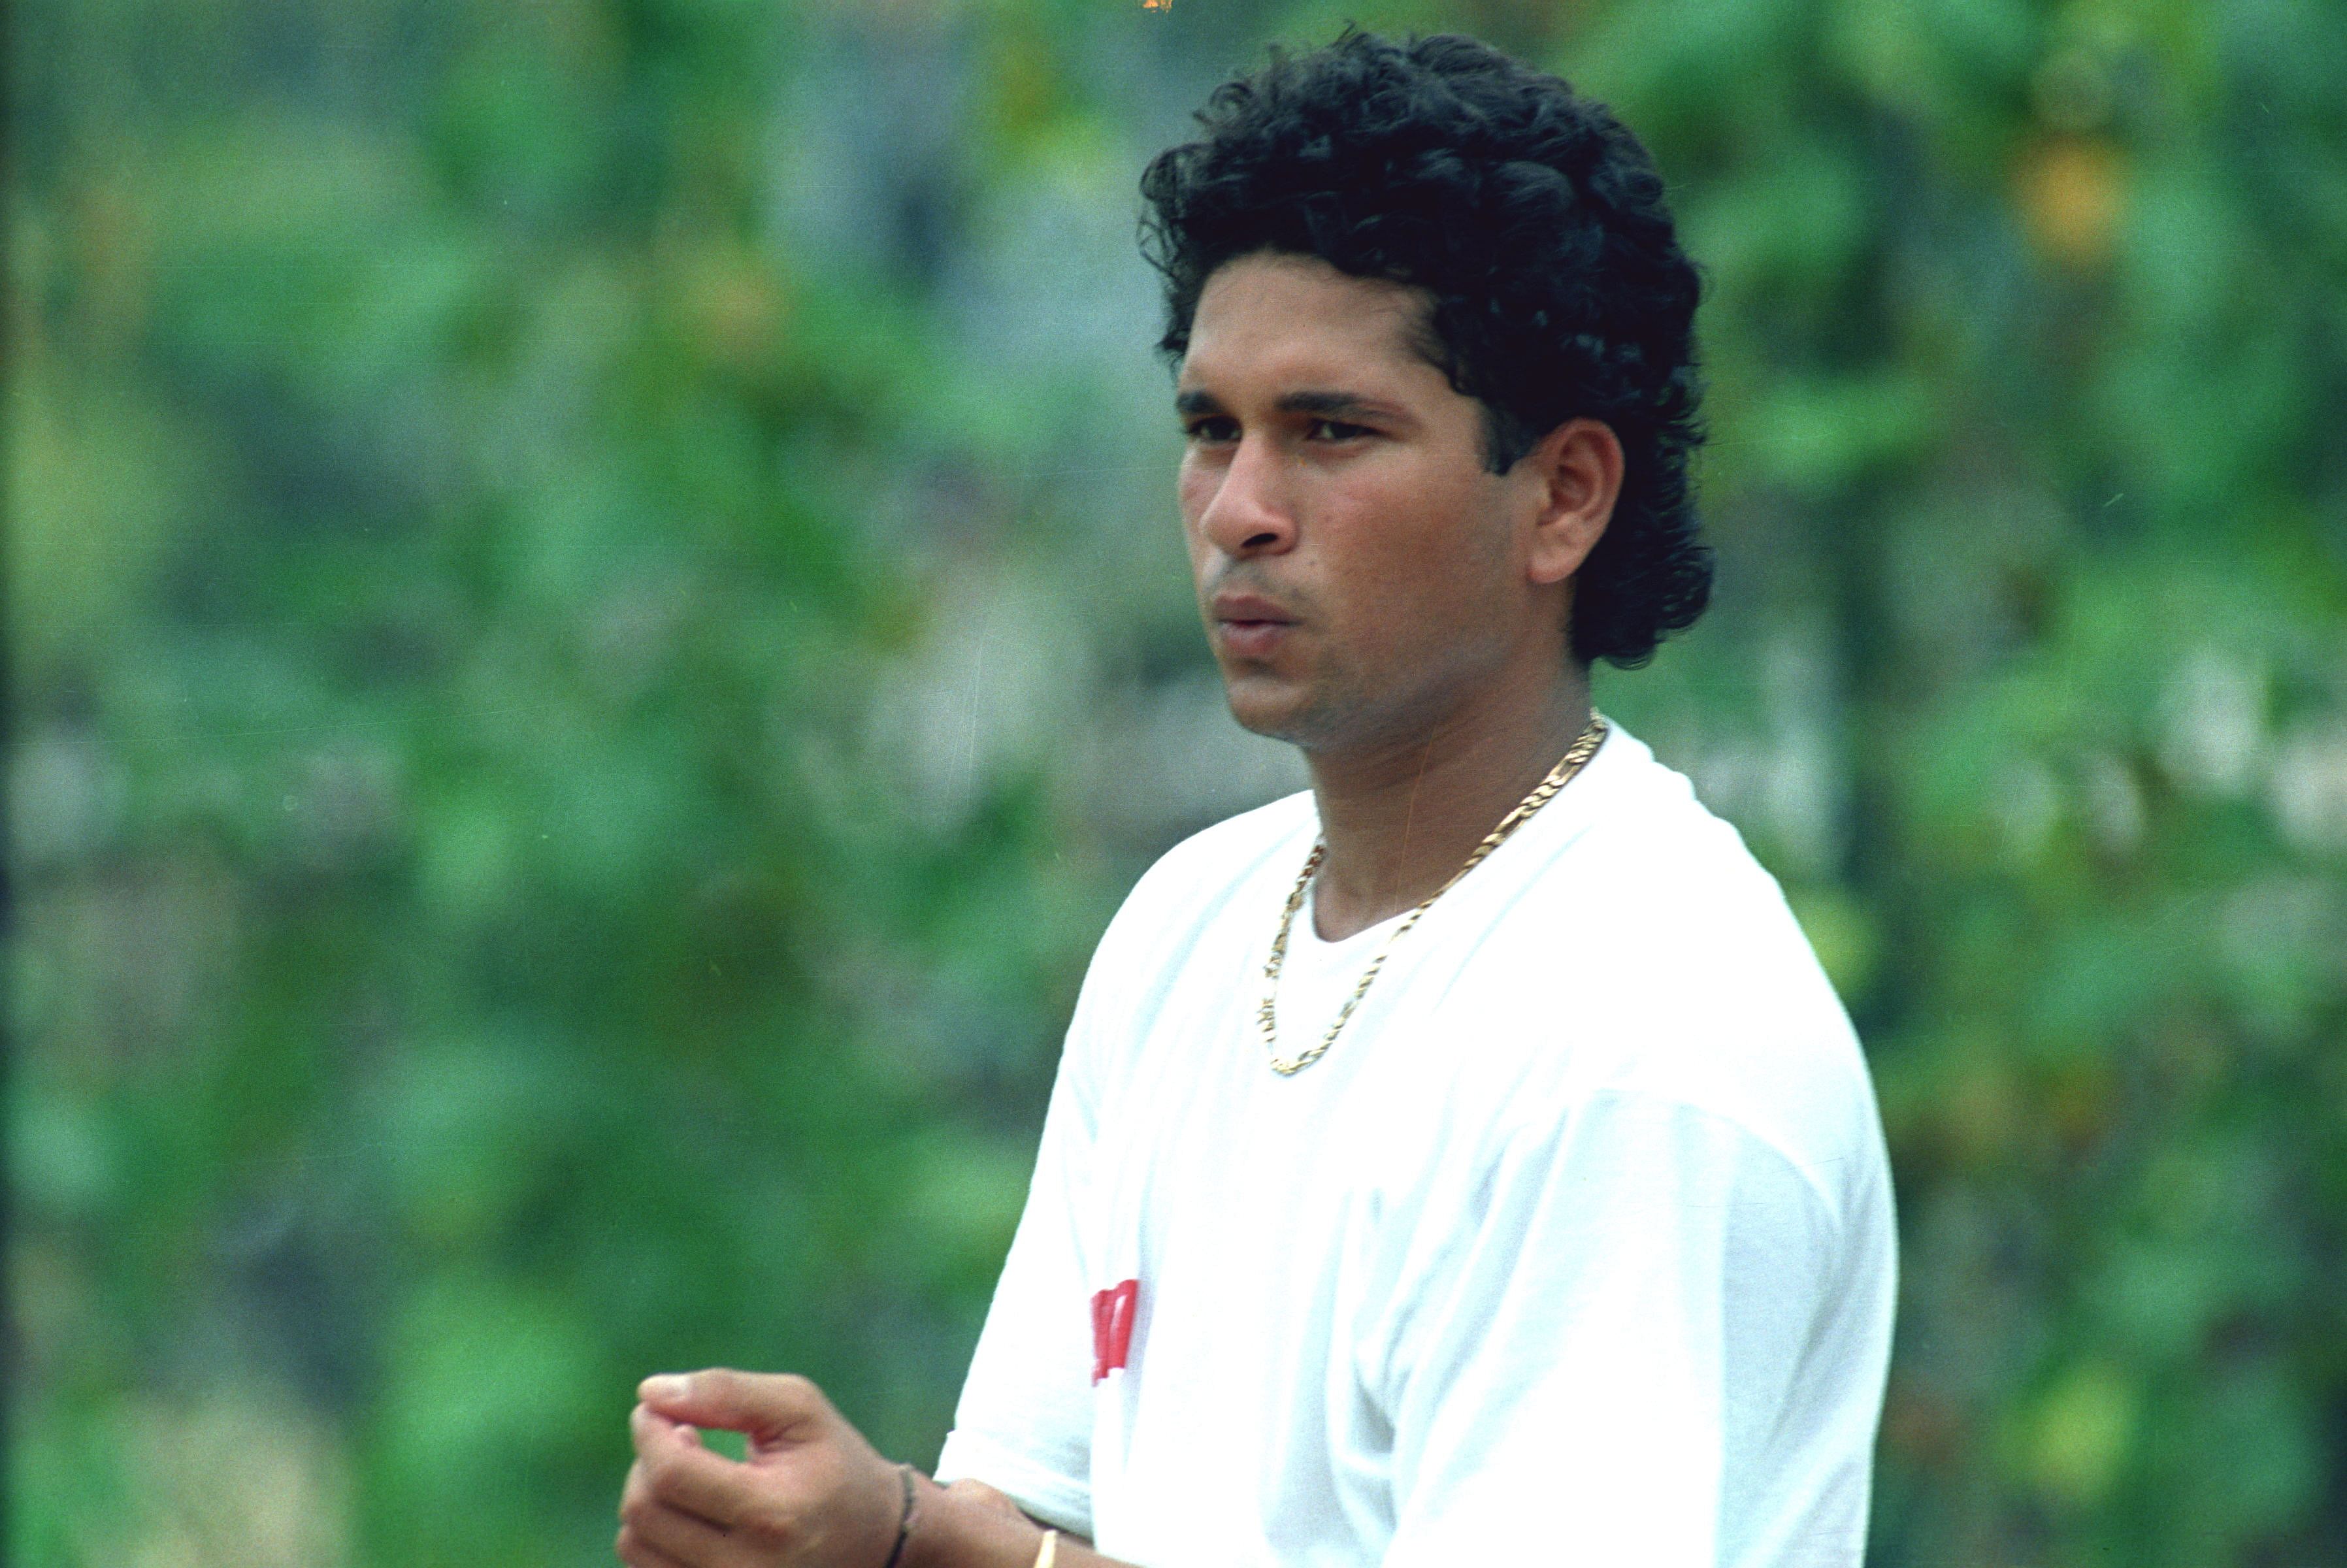 Cricketer Sachin Tendulkar in younger days. Credit: DH Archives